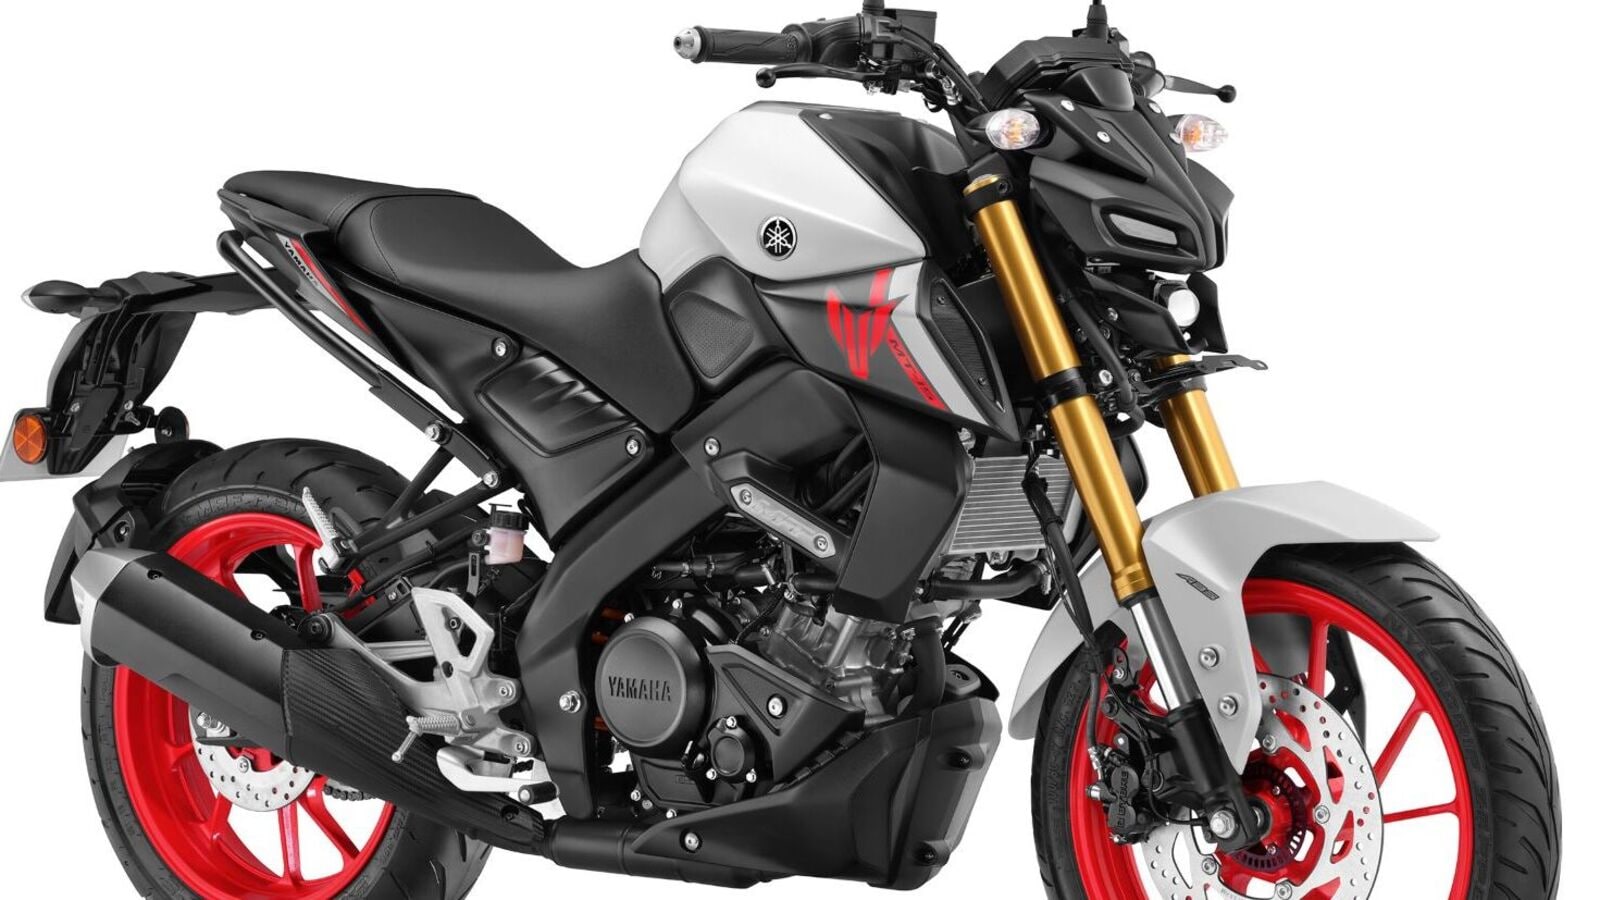 Newly launched Yamaha MT-15 V2 becomes expensive in India